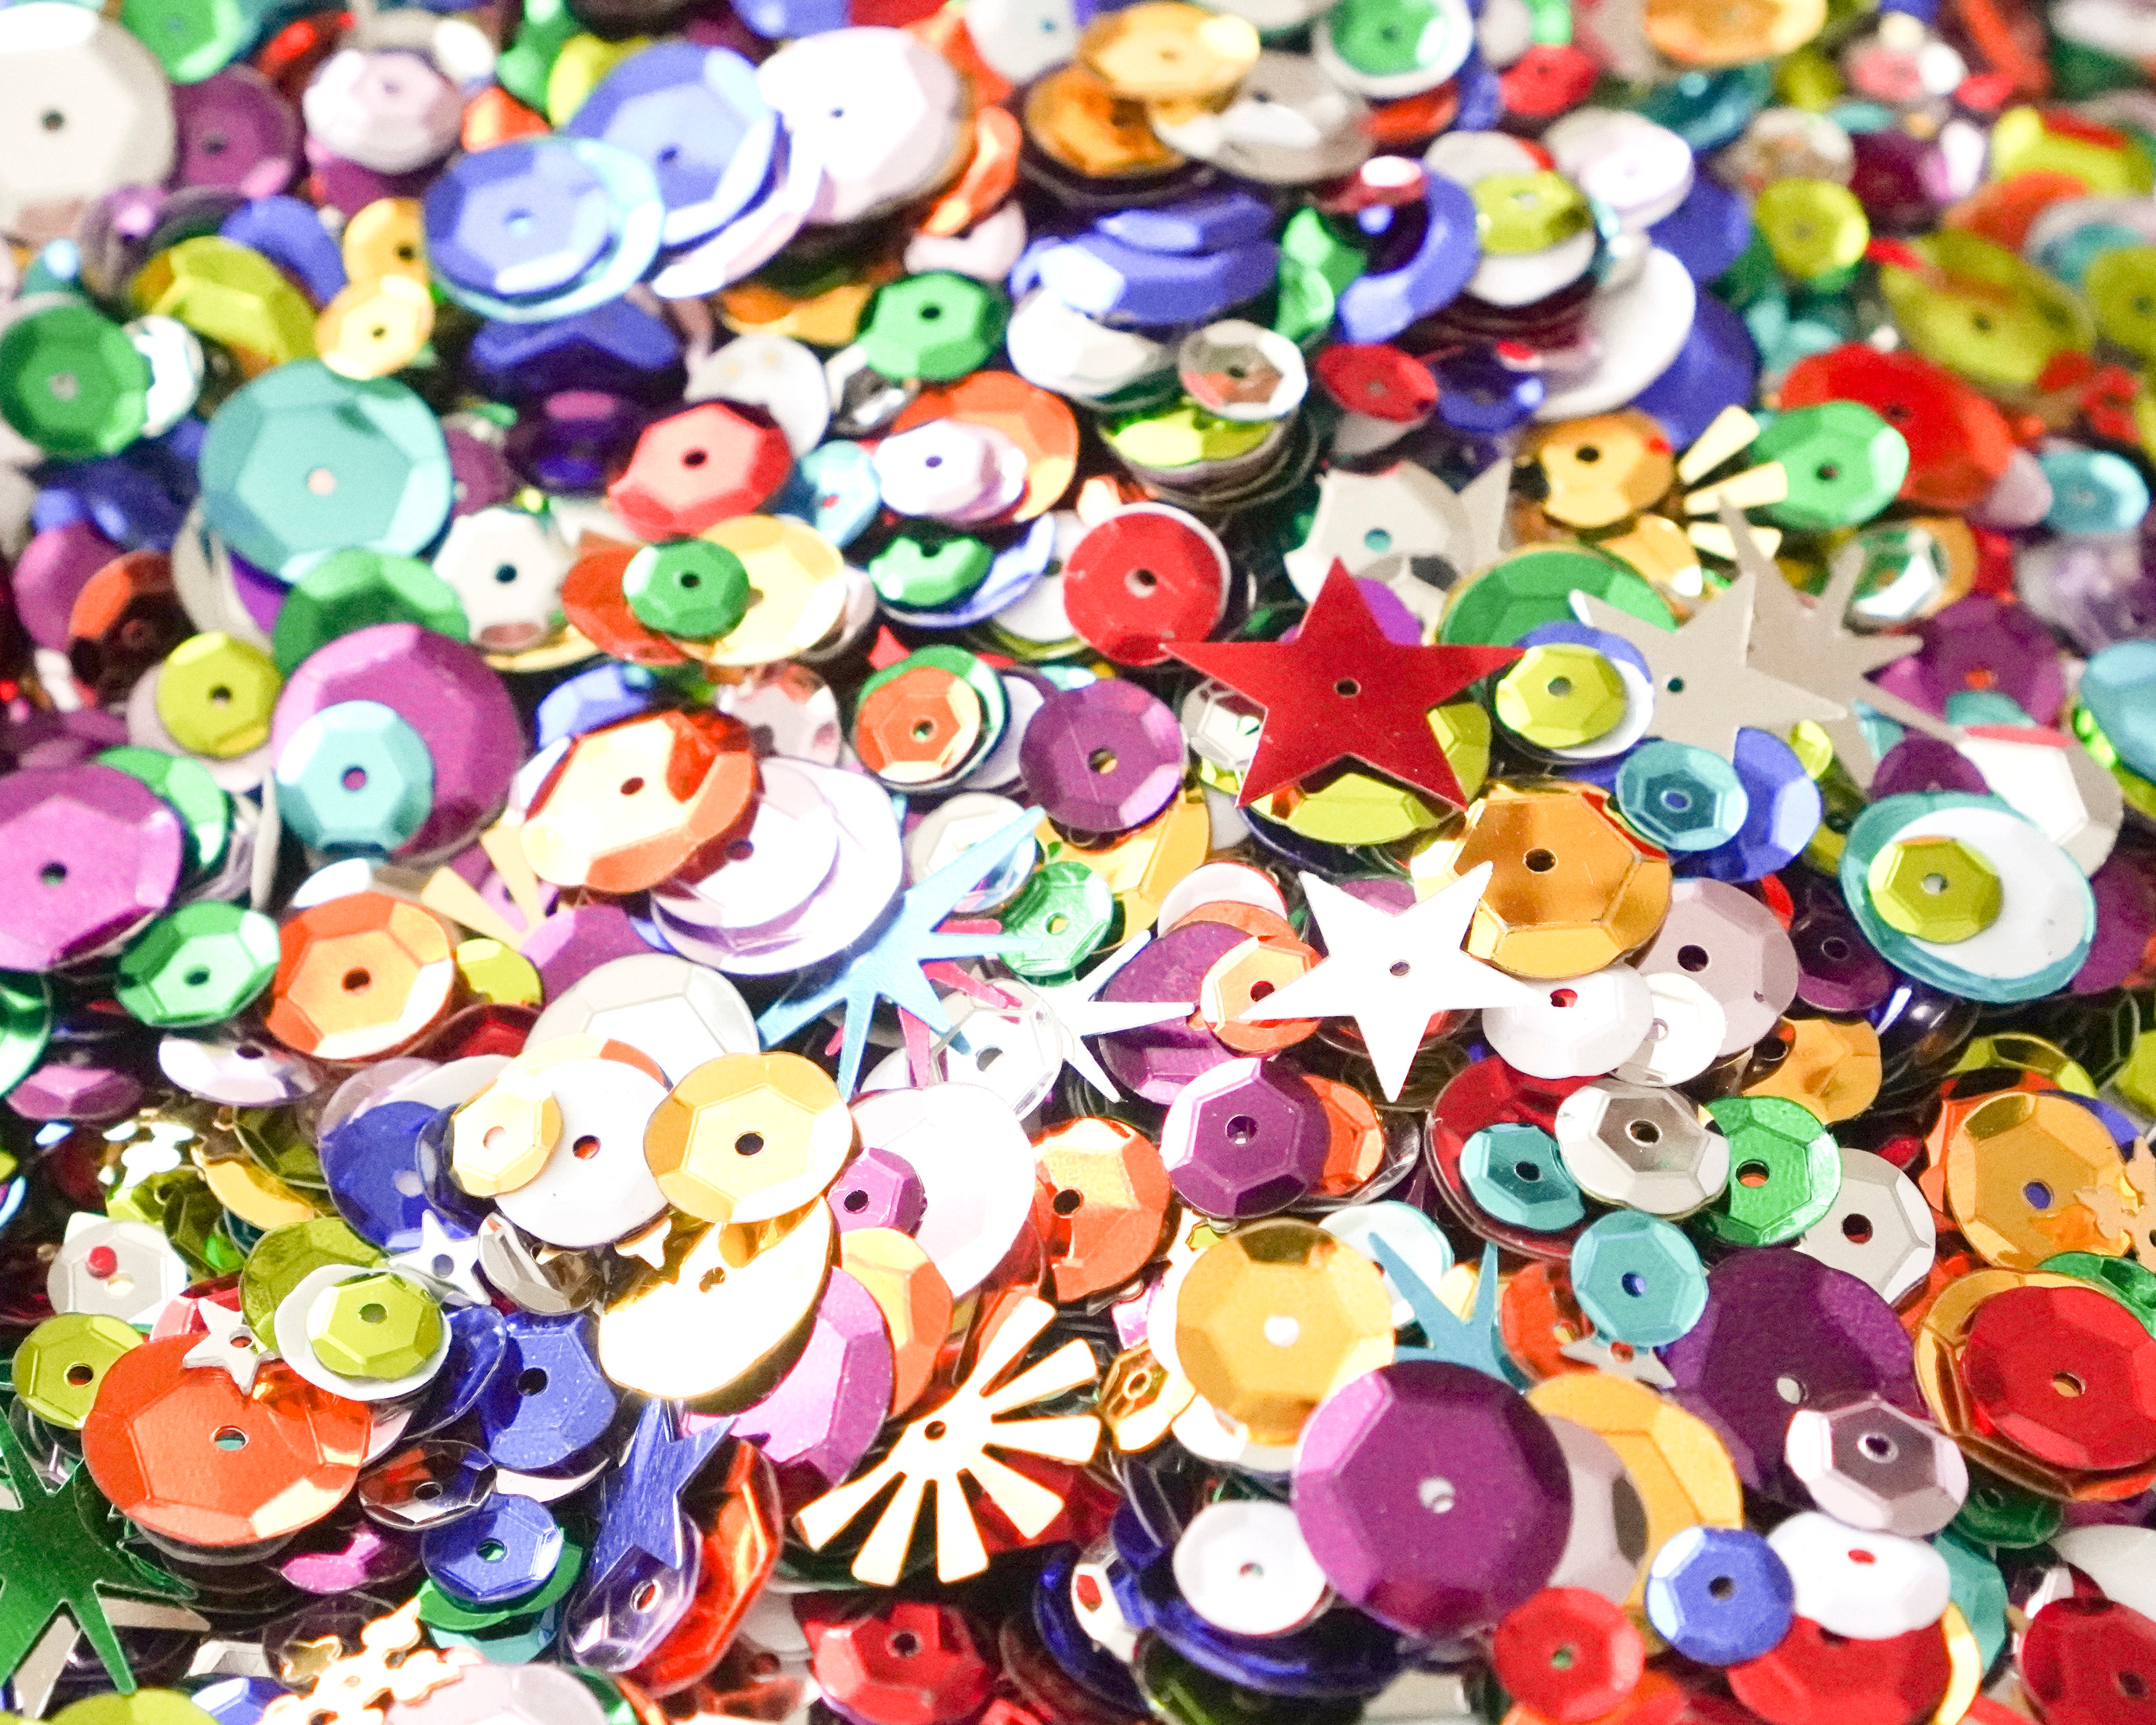 Retro Sequins and Spangles - Multi Color Novelty Mix, 1/2 Cup